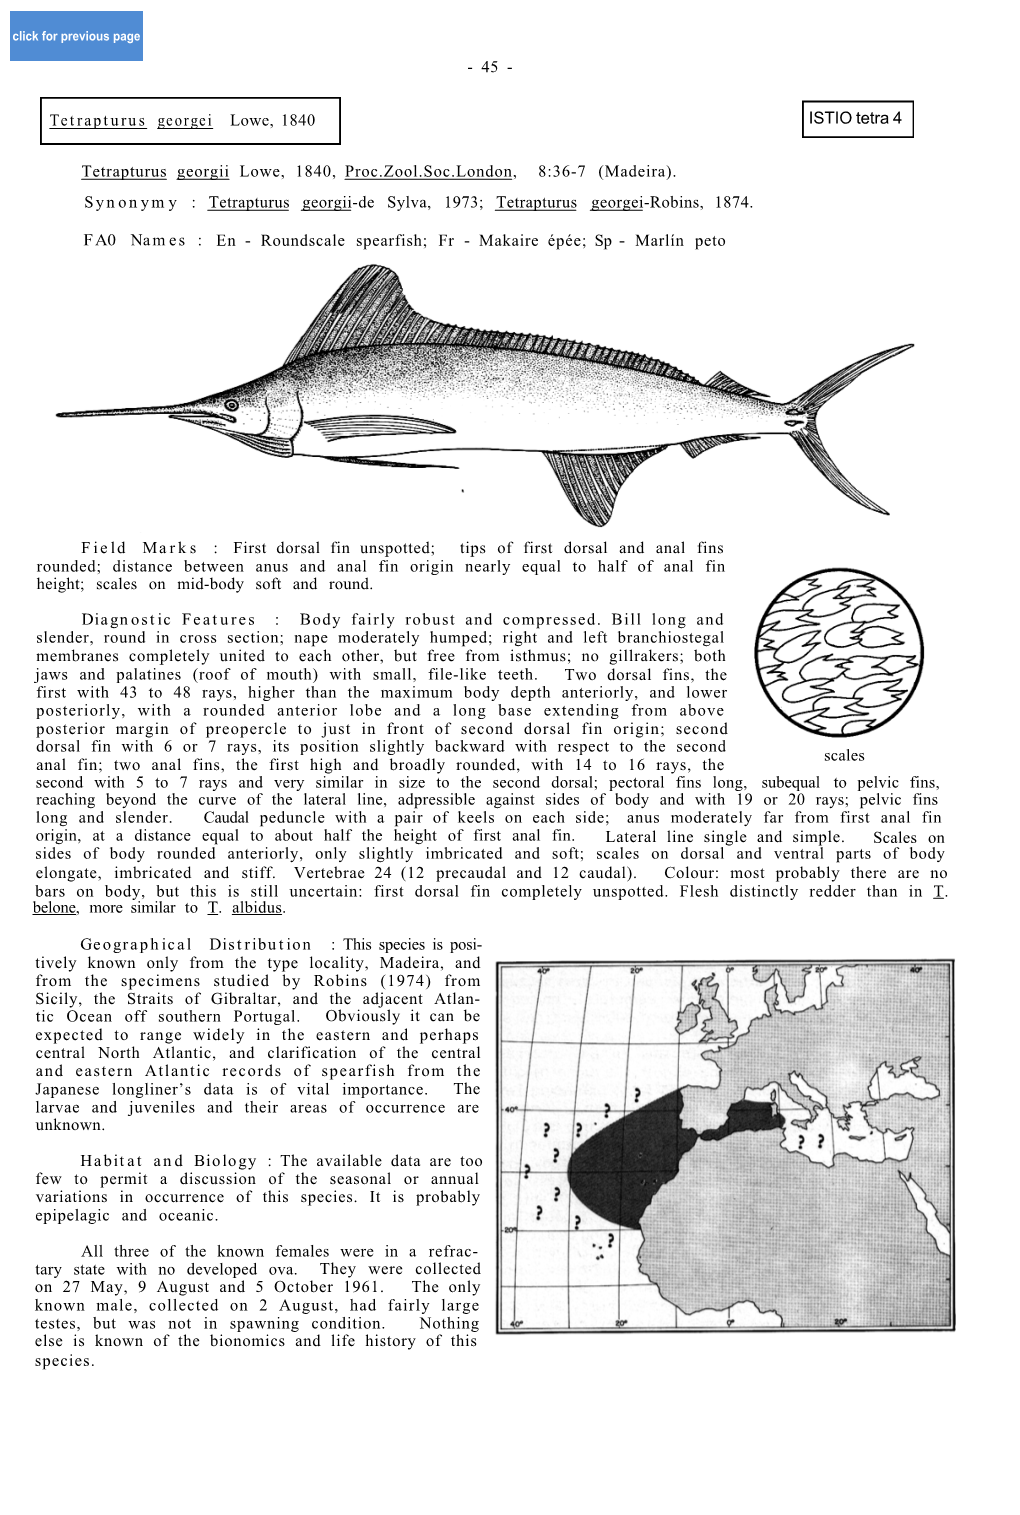 T. Georgei (Roundscale Spearfish)